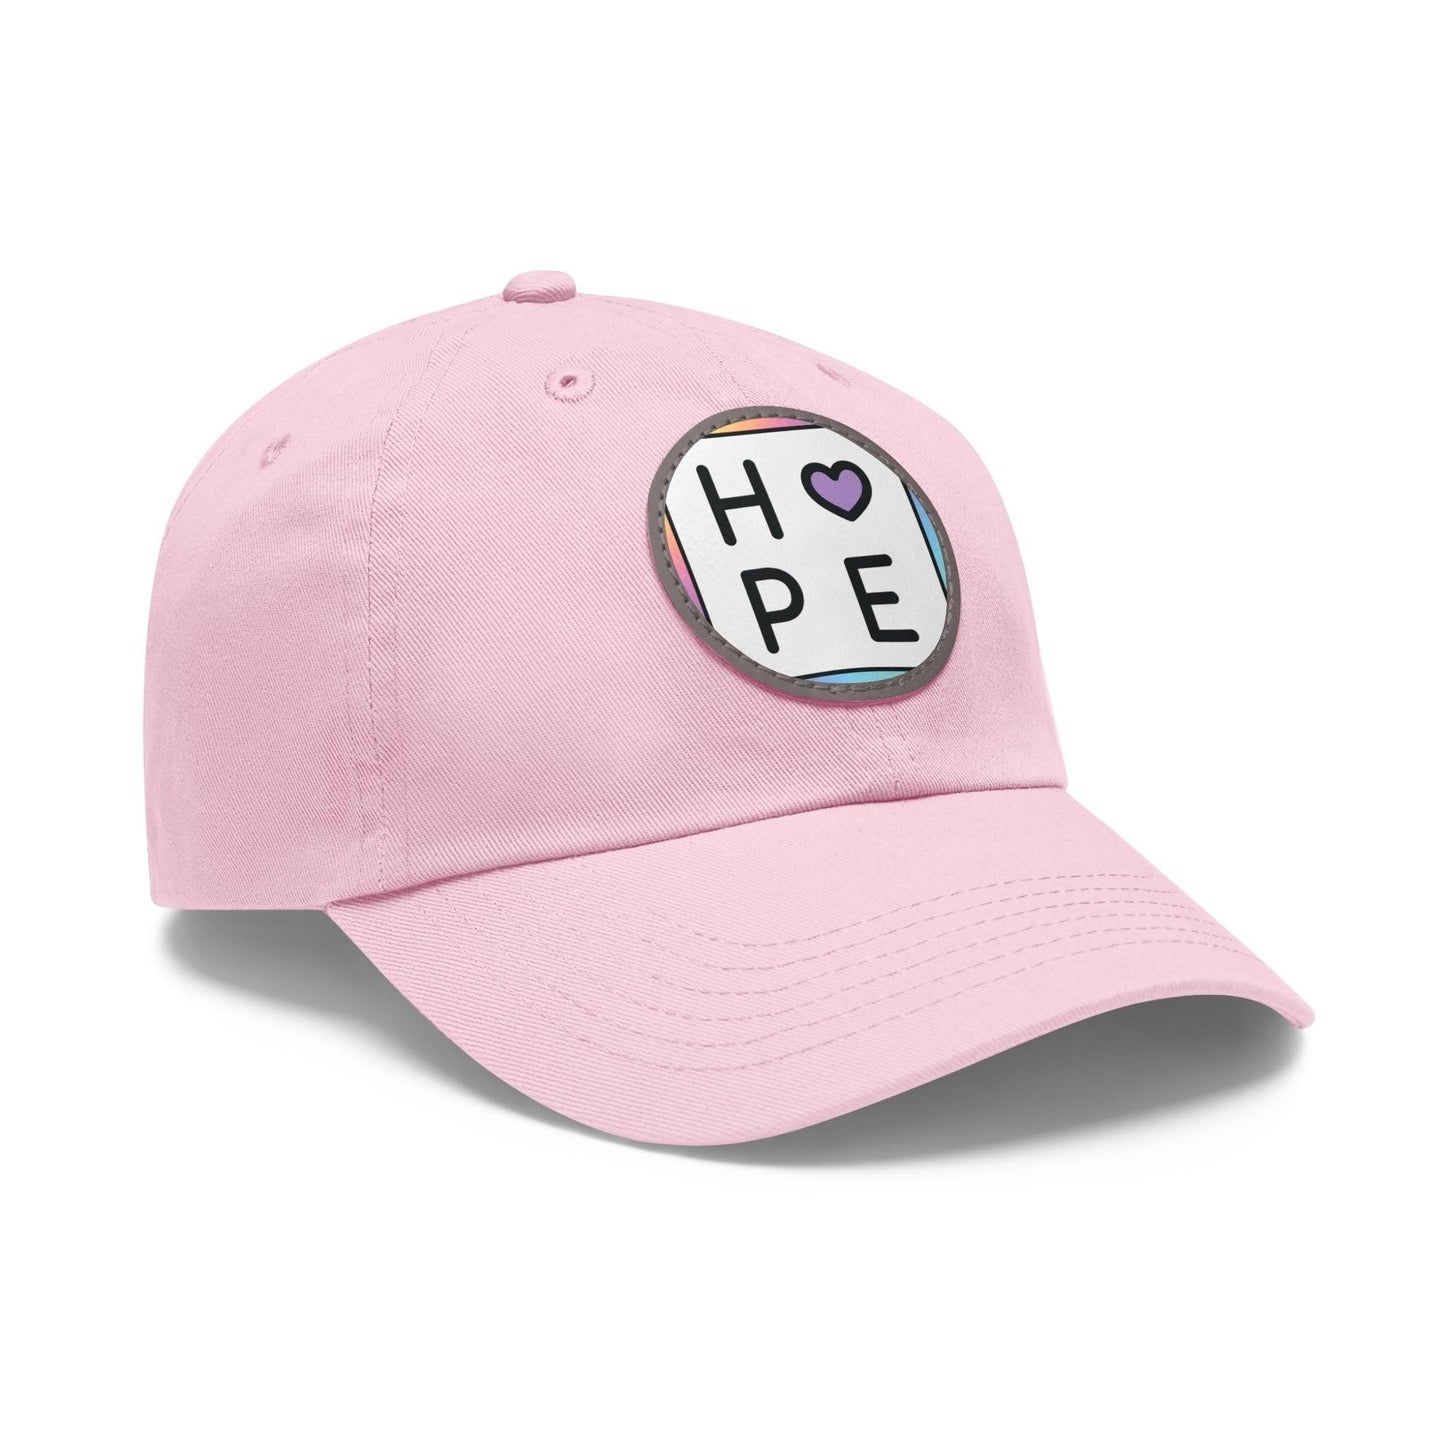 Hope Baseball Cap with Leather Patch Cap Light Pink / Grey patch Circle One size